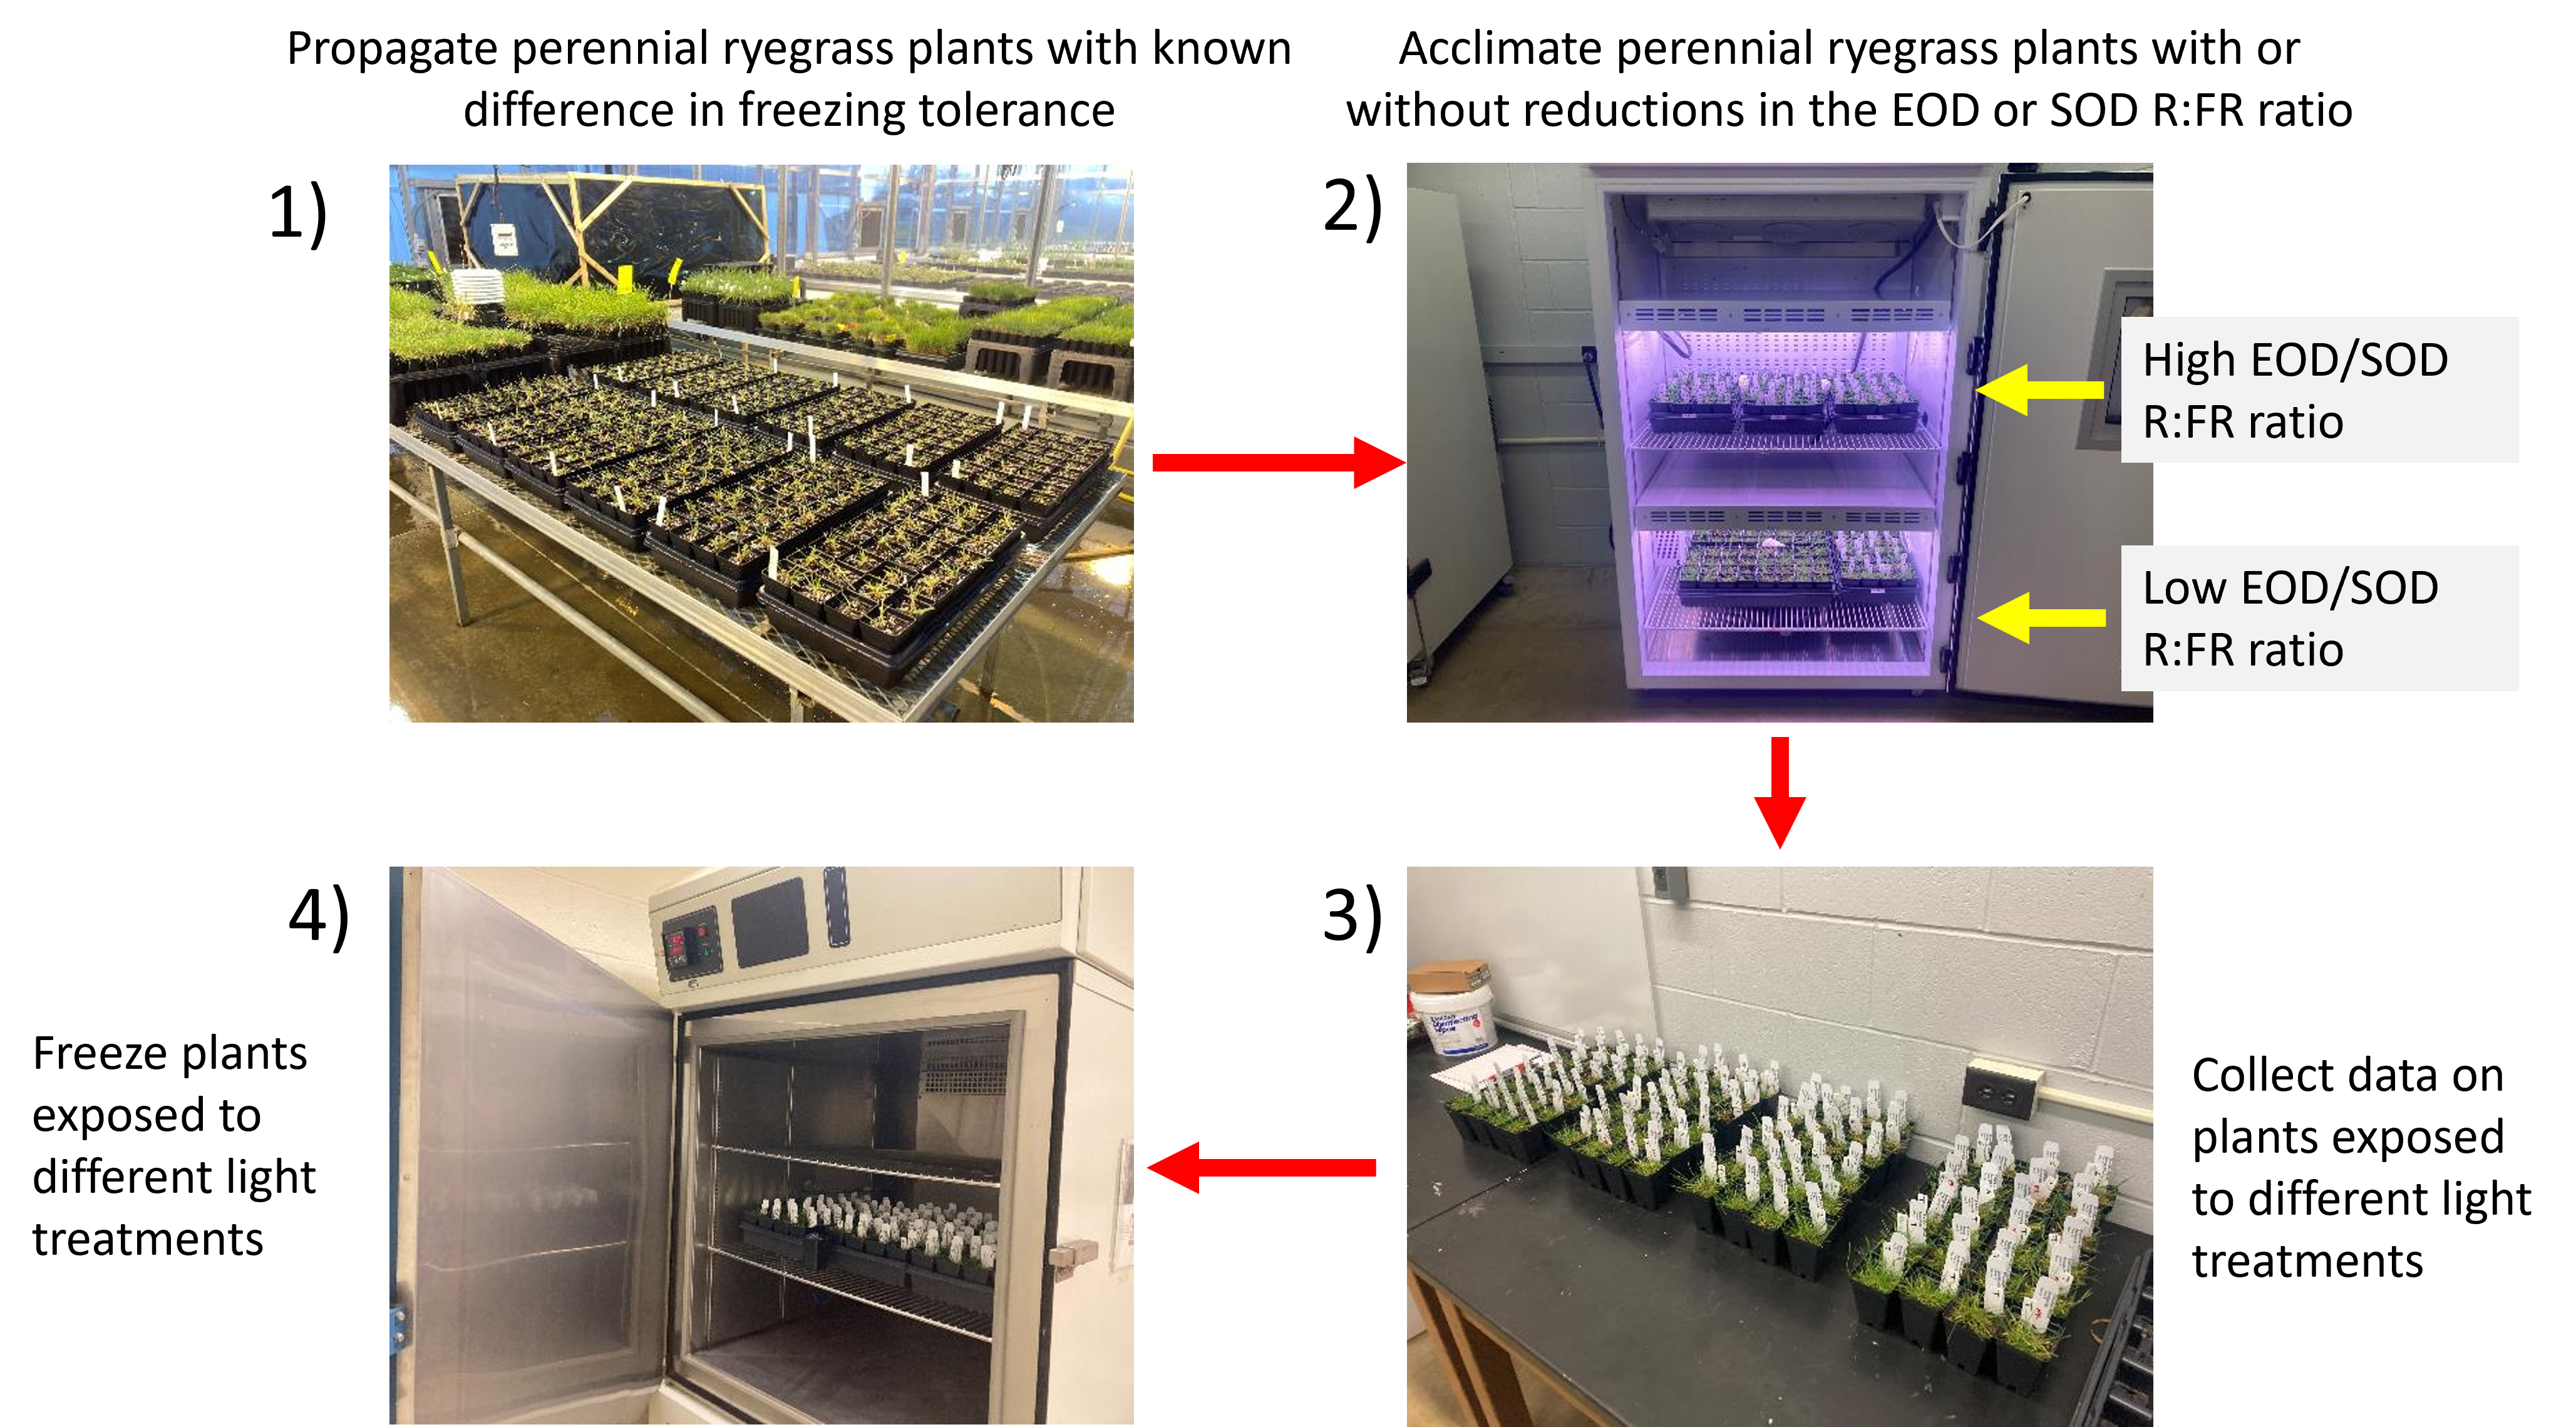 turfgrass plants in the greenhouse, growth chamber, laboratory and freezer